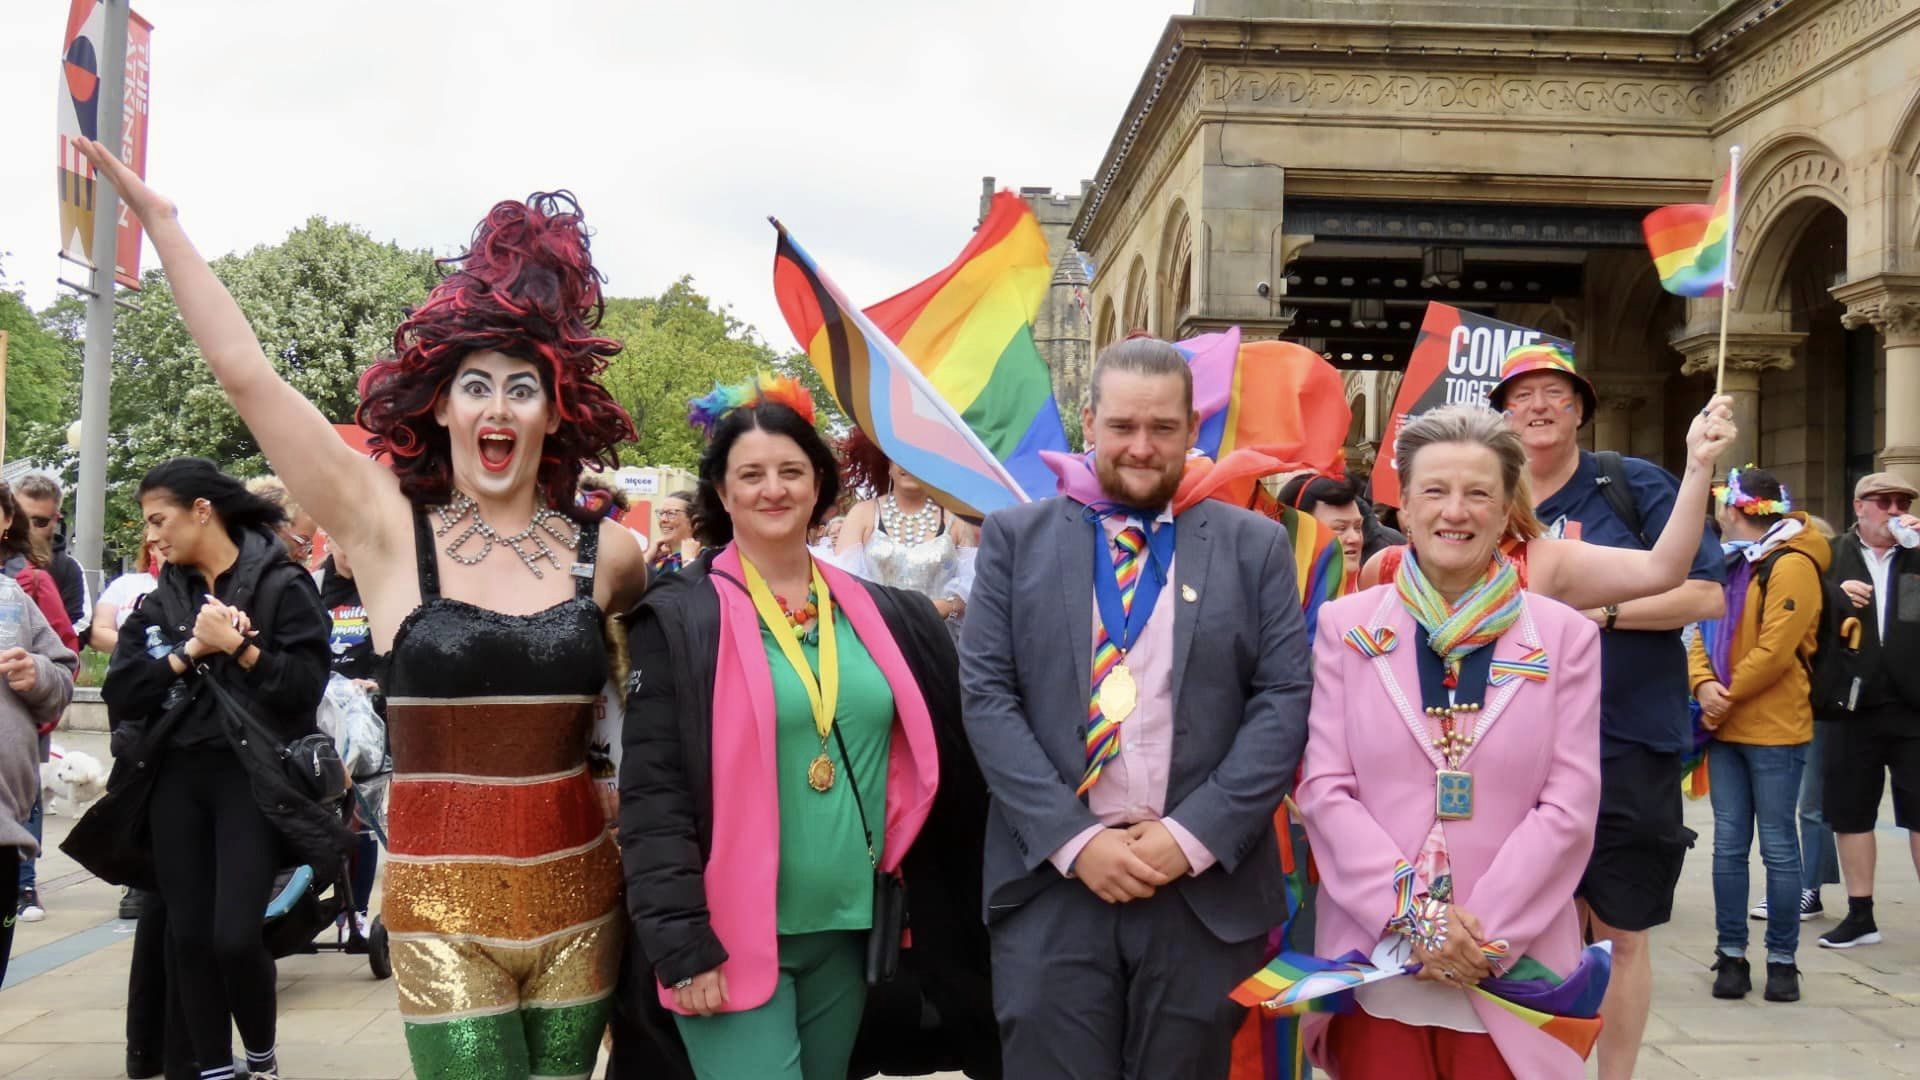 The Sefton Pride parade in Southport. Aida H. Dee (left) Mayor of Sefton Cllr June Burns (right) and other supporters. Photo by Andrew Brown Stand Up For Southport